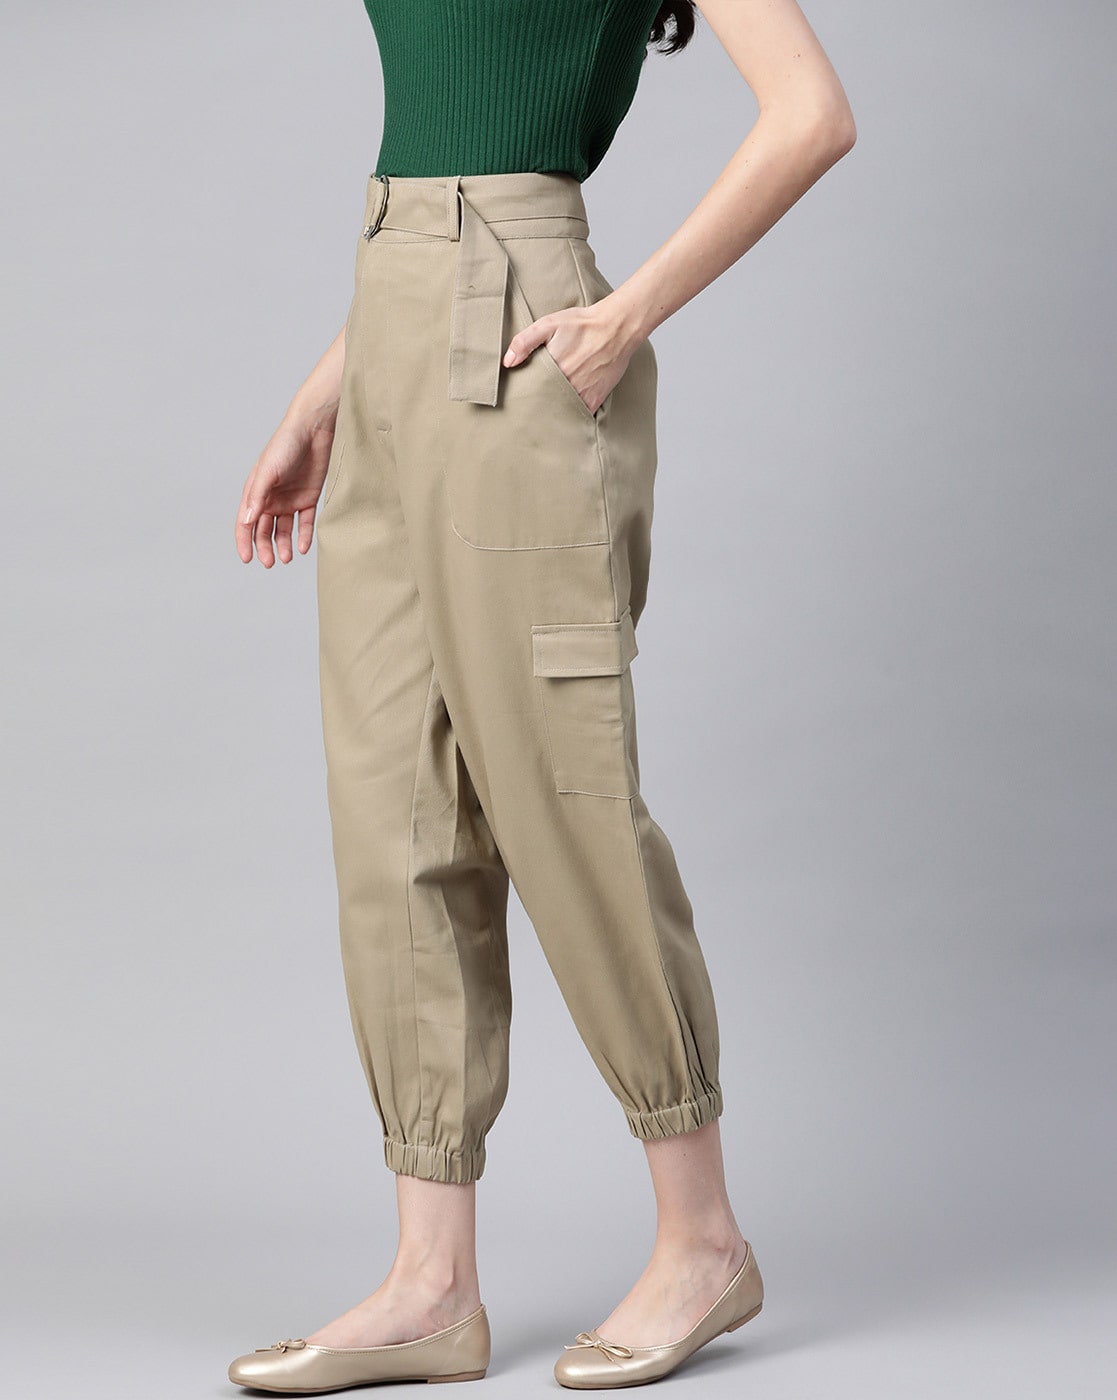 Buy Beige and Brown Combo of 2 Side Pocket Straight Cargo Pants Cotton for  Best Price, Reviews, Free Shipping